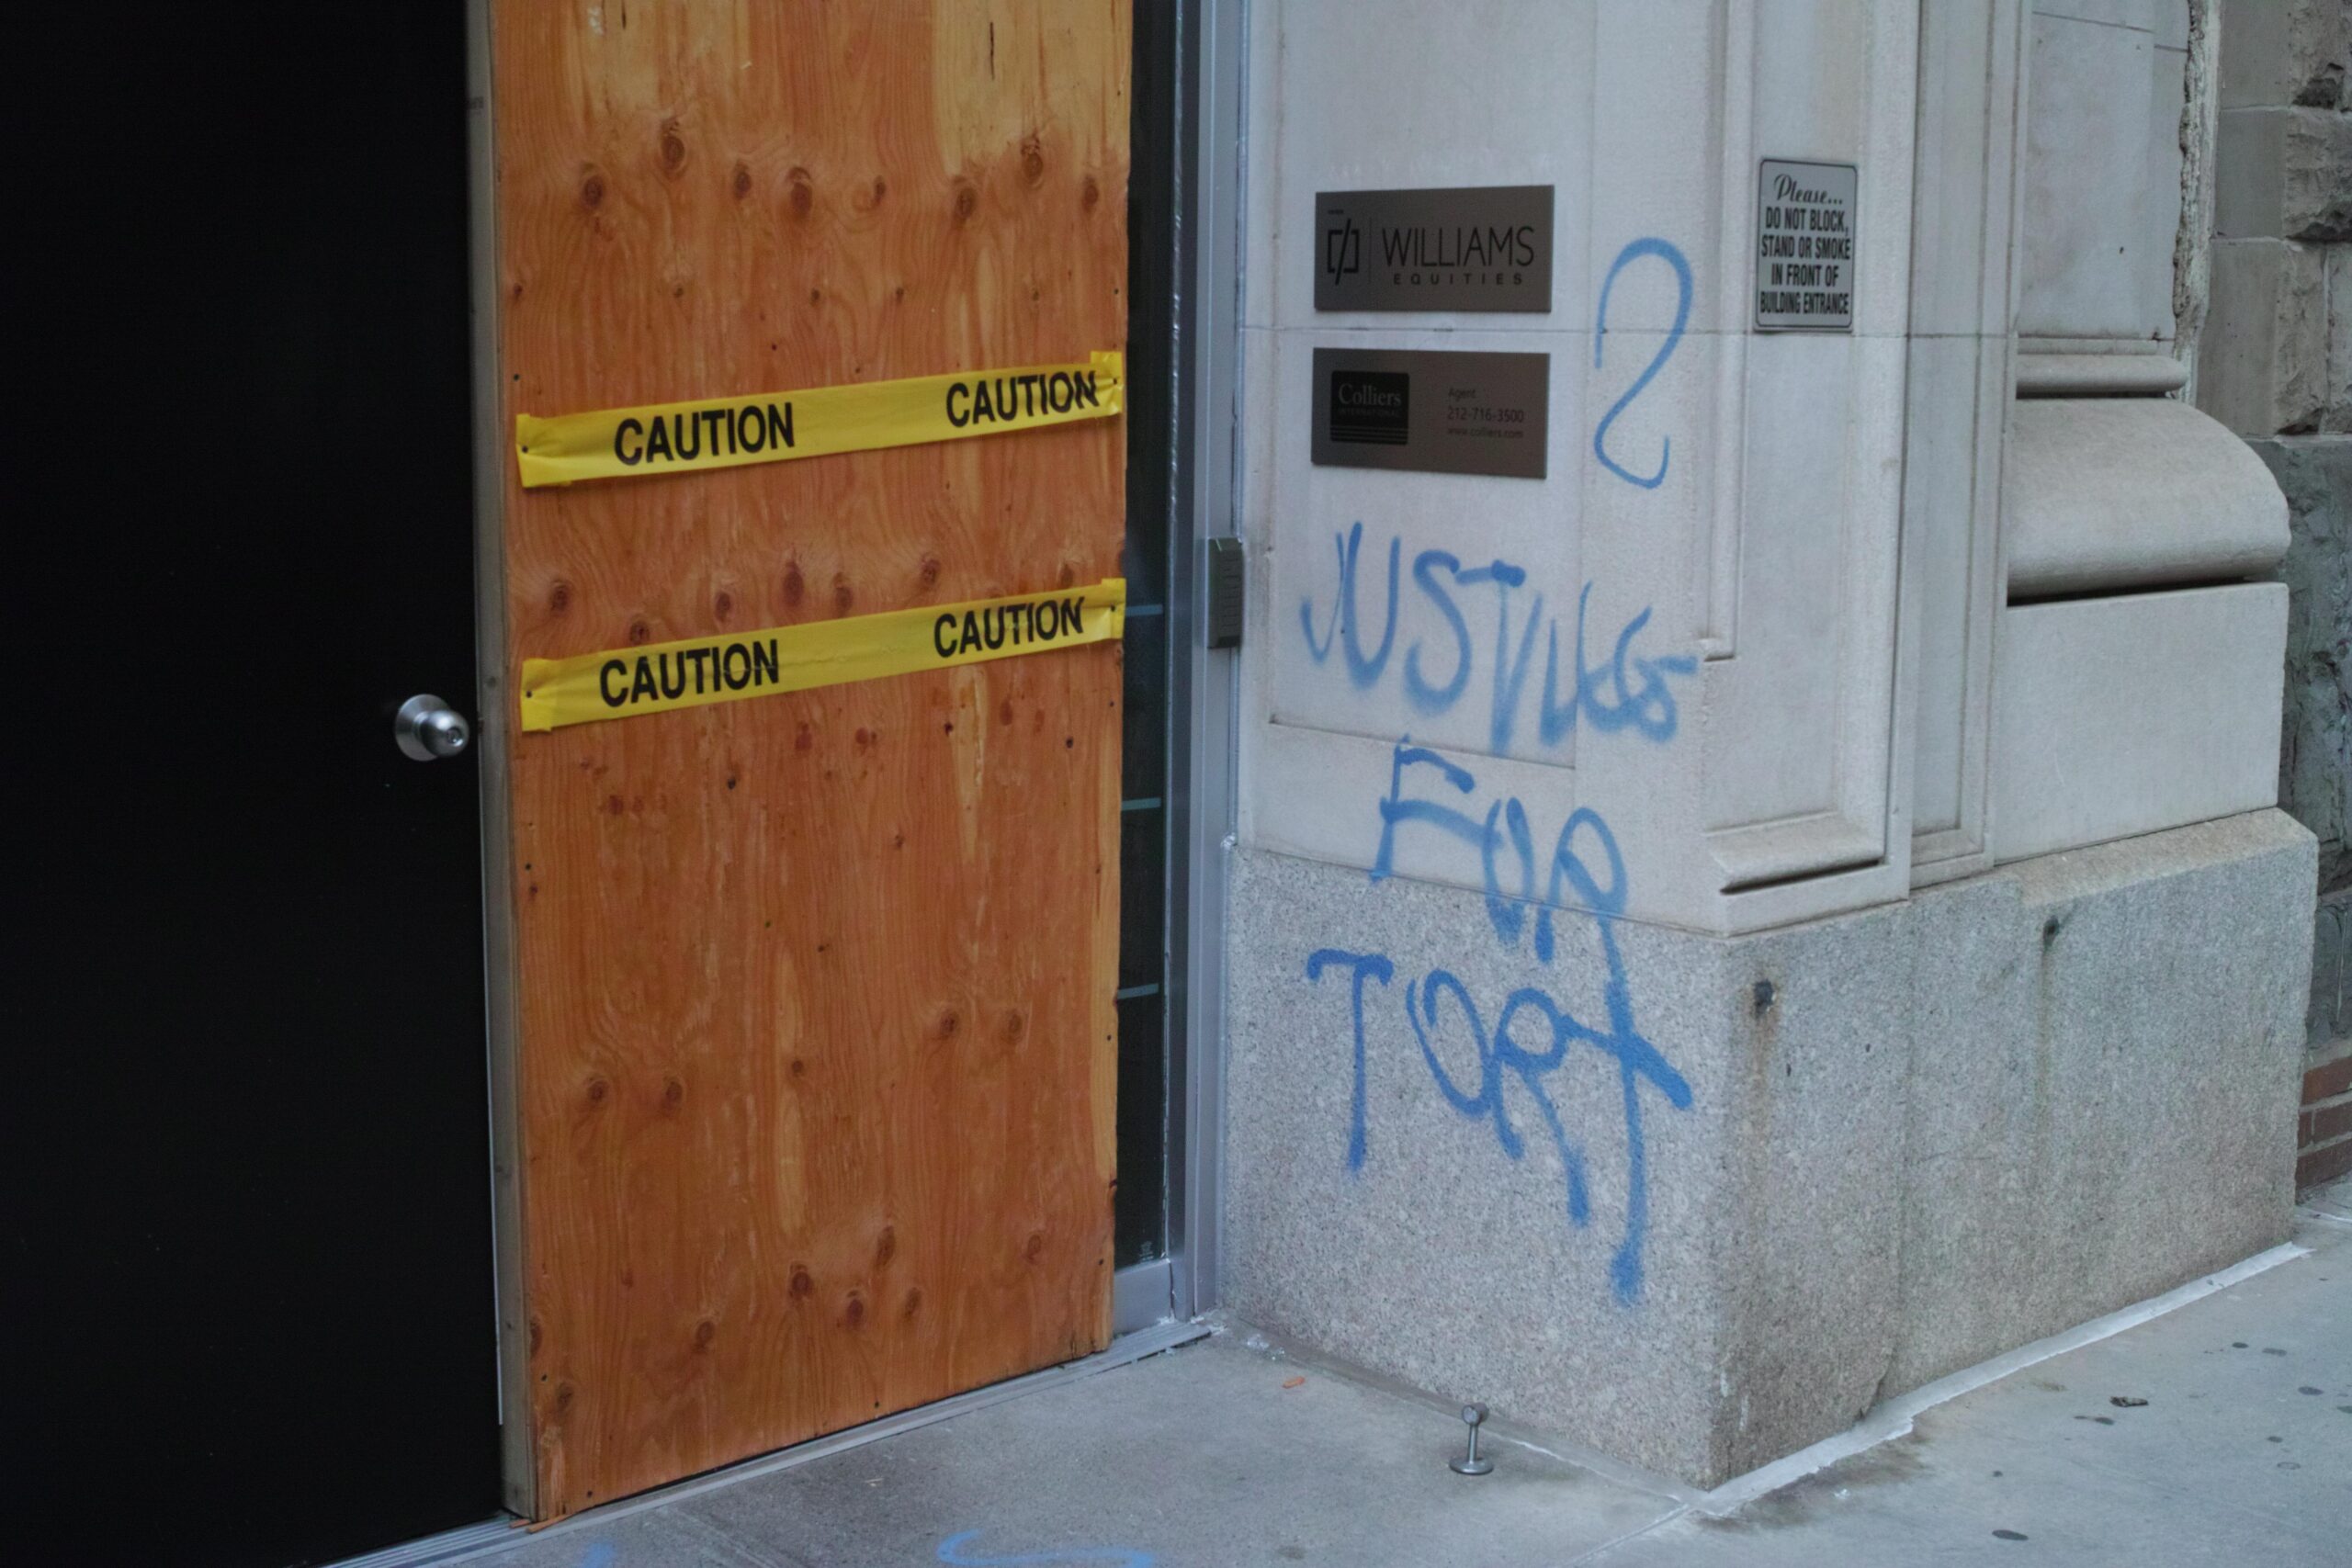 Onto a concrete wall, "JUSTICE FOR TORT" is tagged in blue spray paint. A door next to the wall is covered in plywood and caution tape.